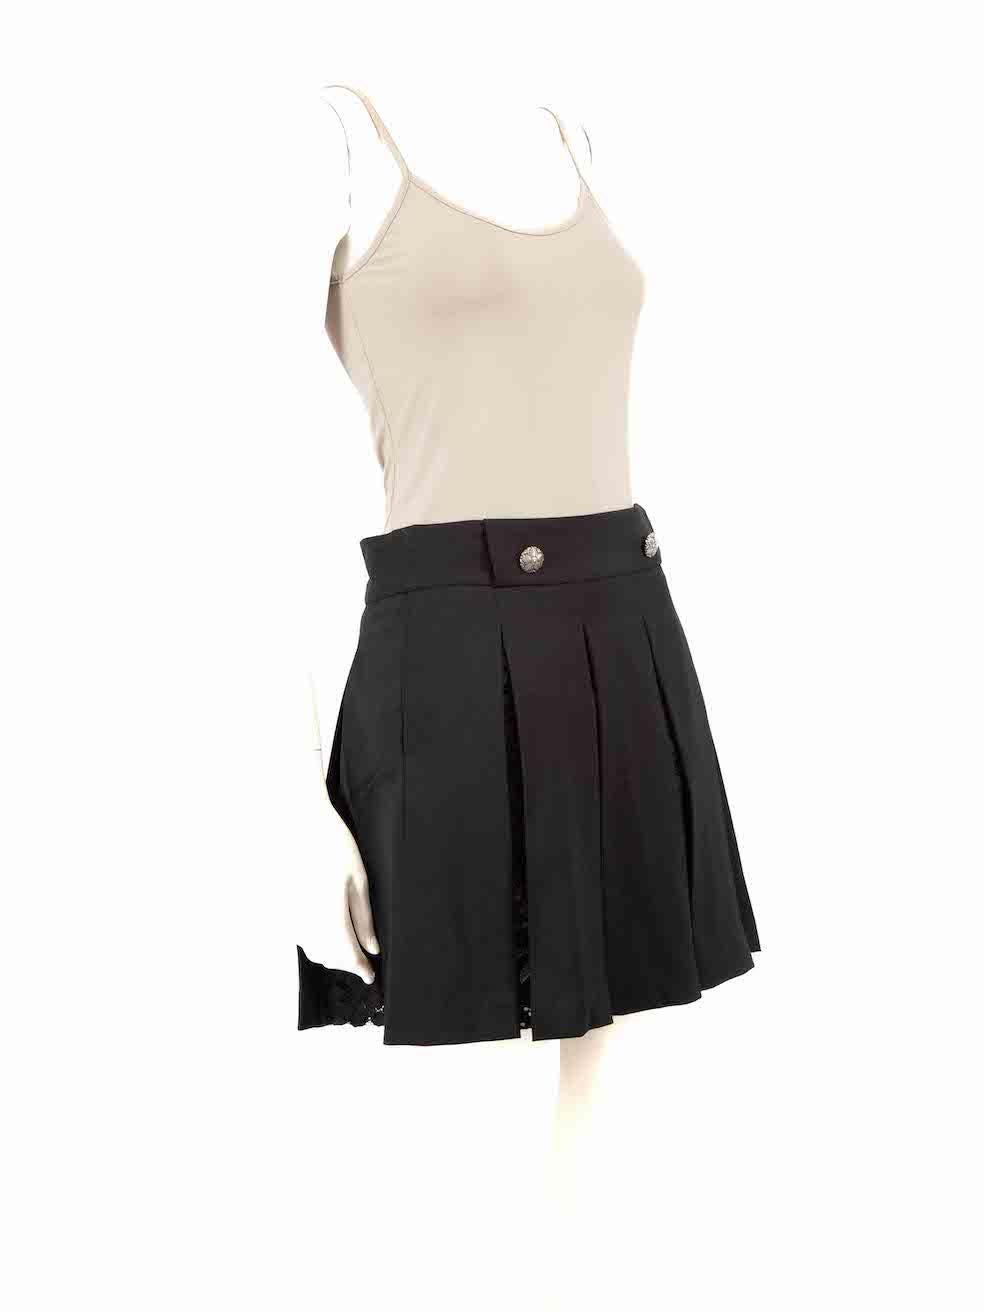 CONDITION is Very good. Hardly any visible wear to skirt is evident on this used The Kooples designer resale item.
 
 
 
 Details
 
 
 Black
 
 Wool
 
 Skirt
 
 Pleated
 
 Lace panel
 
 Mini
 
 Front button detail
 
 Side zip and hook fastening
 
 
